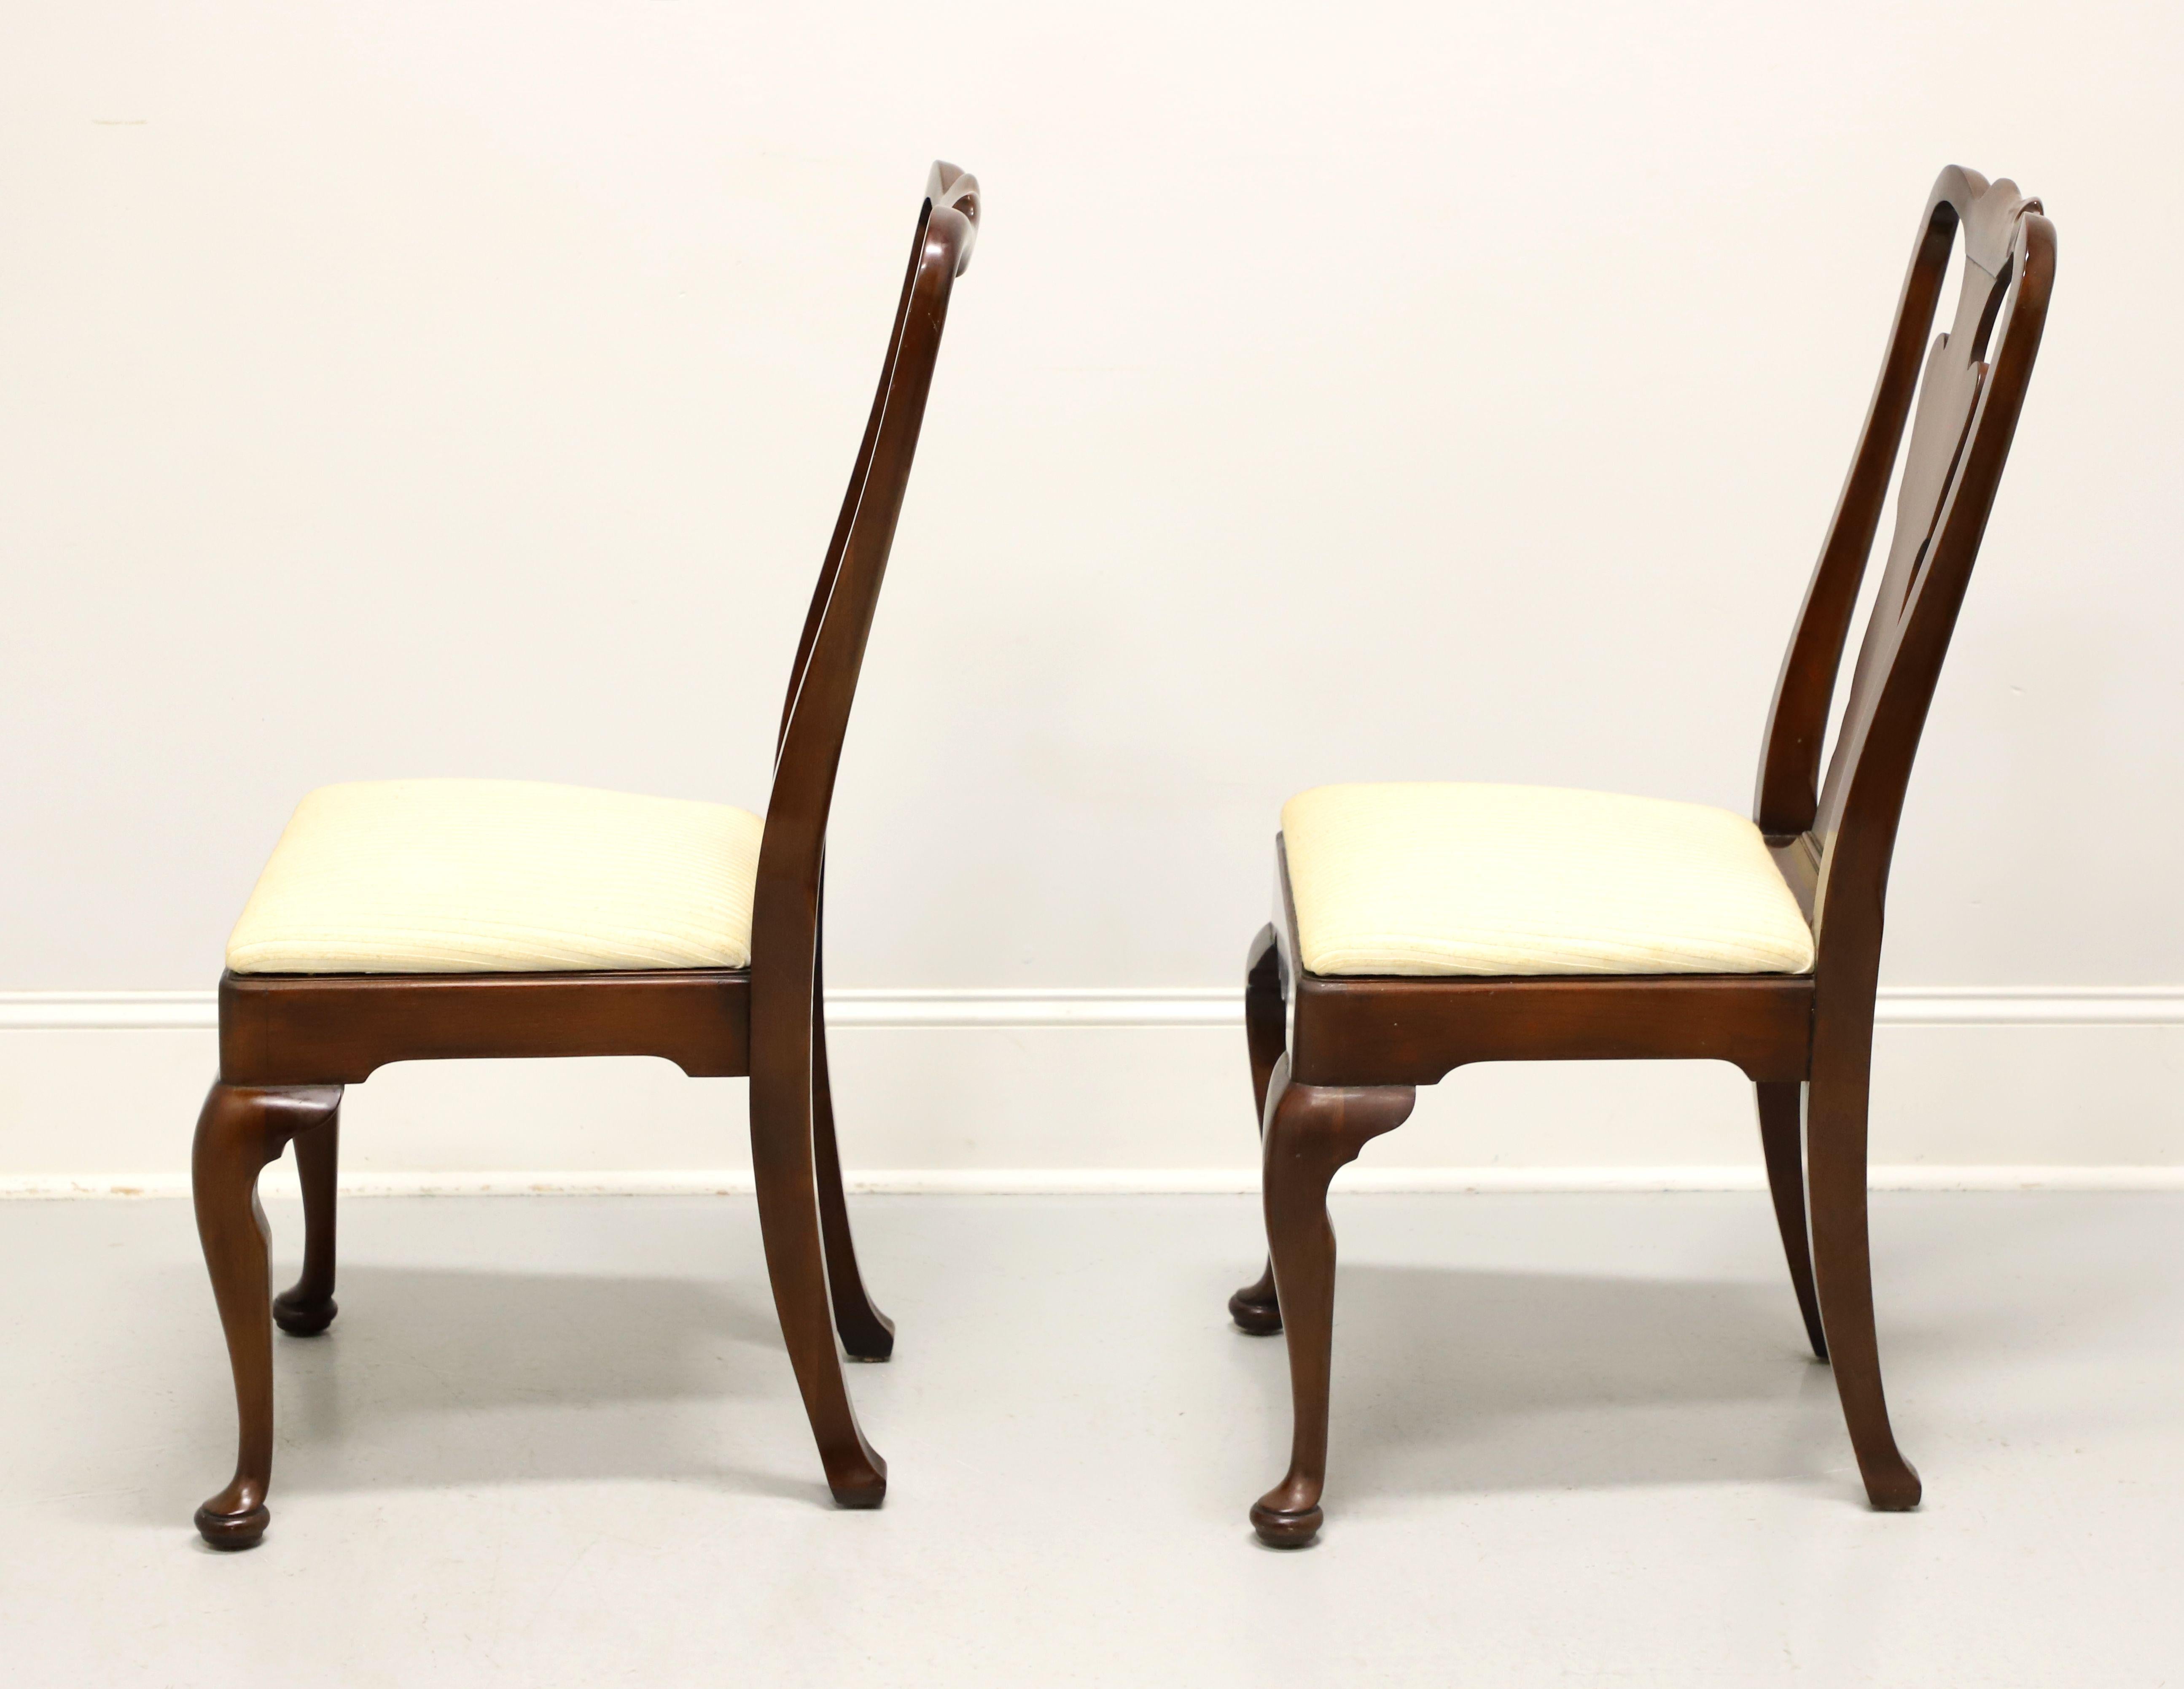 STATTON Old Towne Cherry Queen Anne Dining Side Chairs - Pair A In Good Condition For Sale In Charlotte, NC